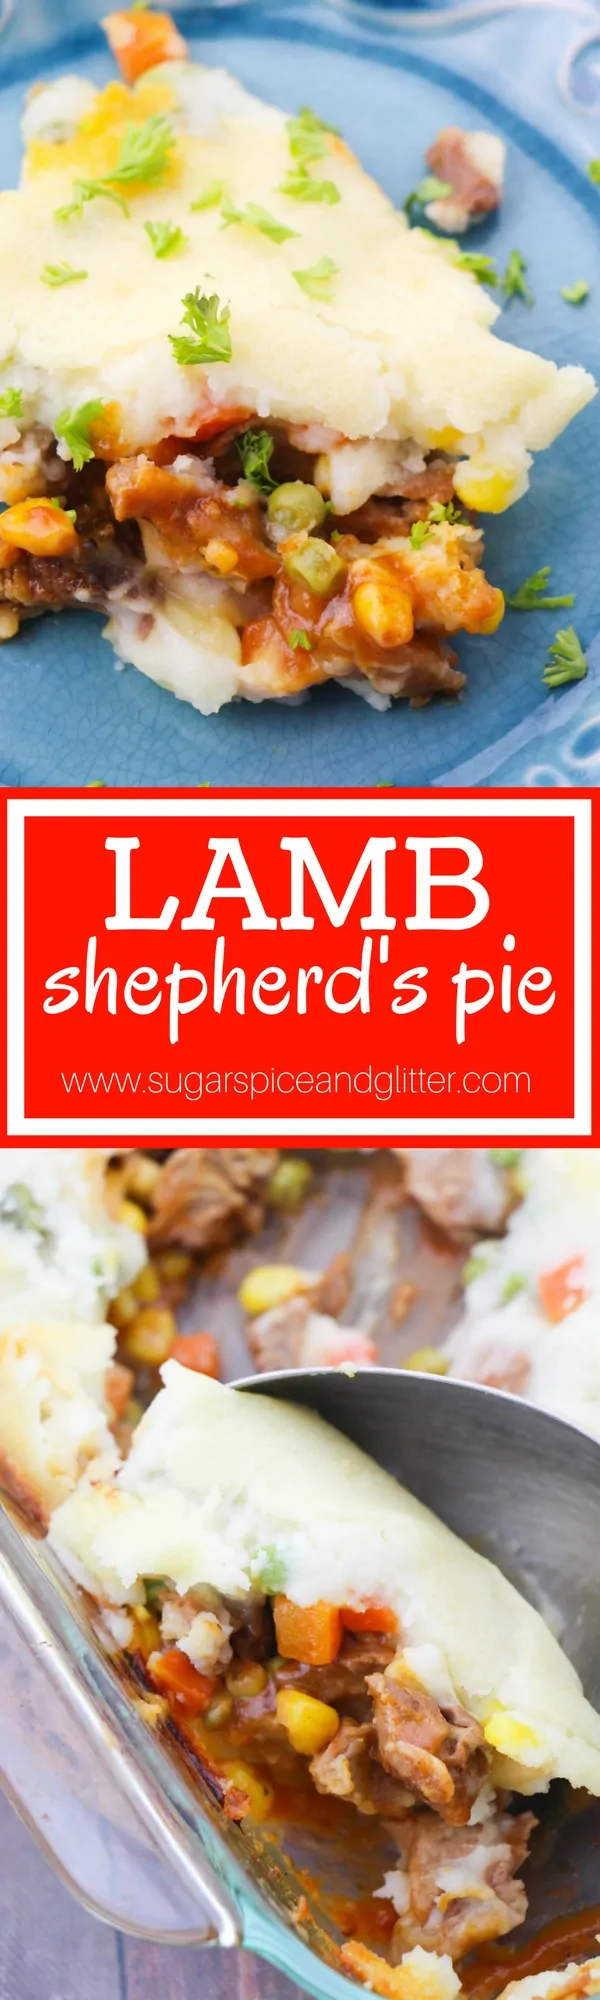 A delicious and authentic Shepherd's Pie made with lamb, the perfect Irish recipe for St Patrick's Day or just a special comfort food recipe